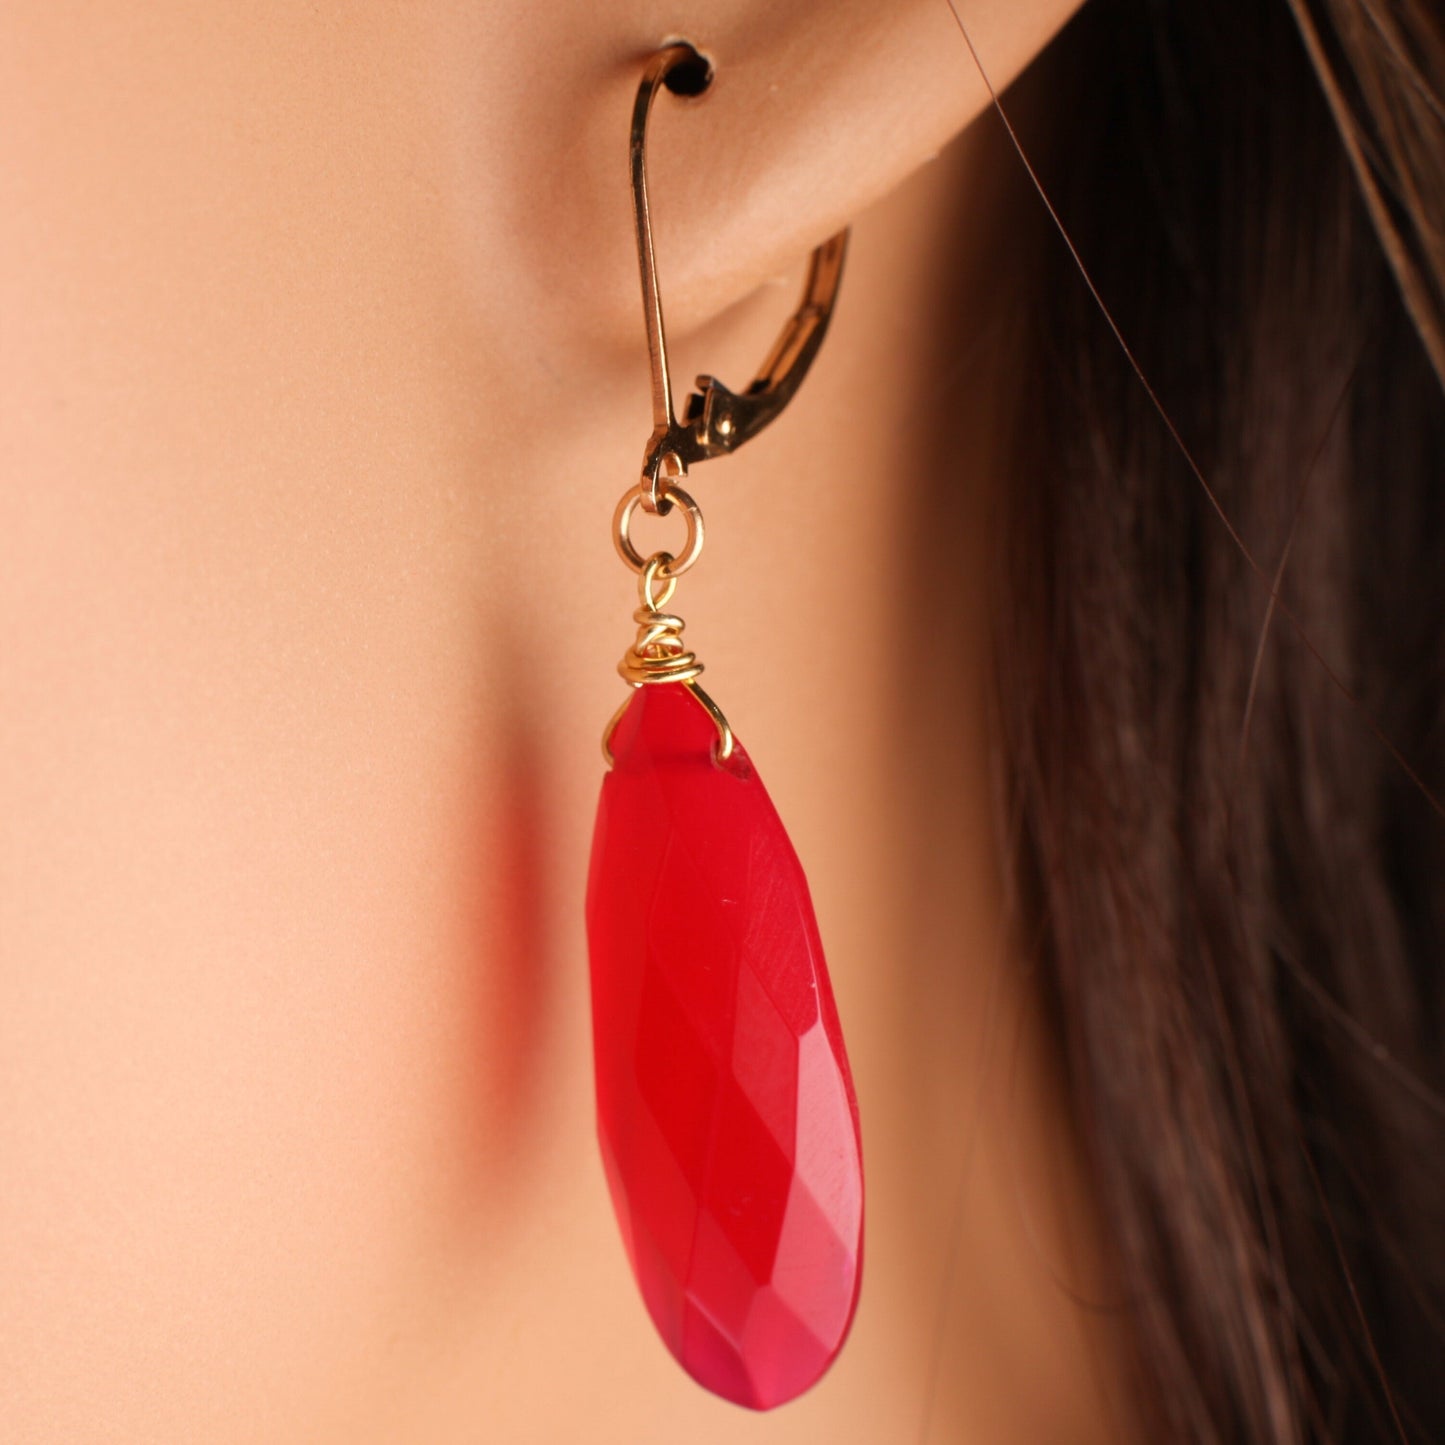 Hot Pink Chalcedony 9.5x25mm long Briolette Teardrop, 14K Gold Filled Earwire or Leverback, Boho, Gemstone Jewelry handmade Gift for Her